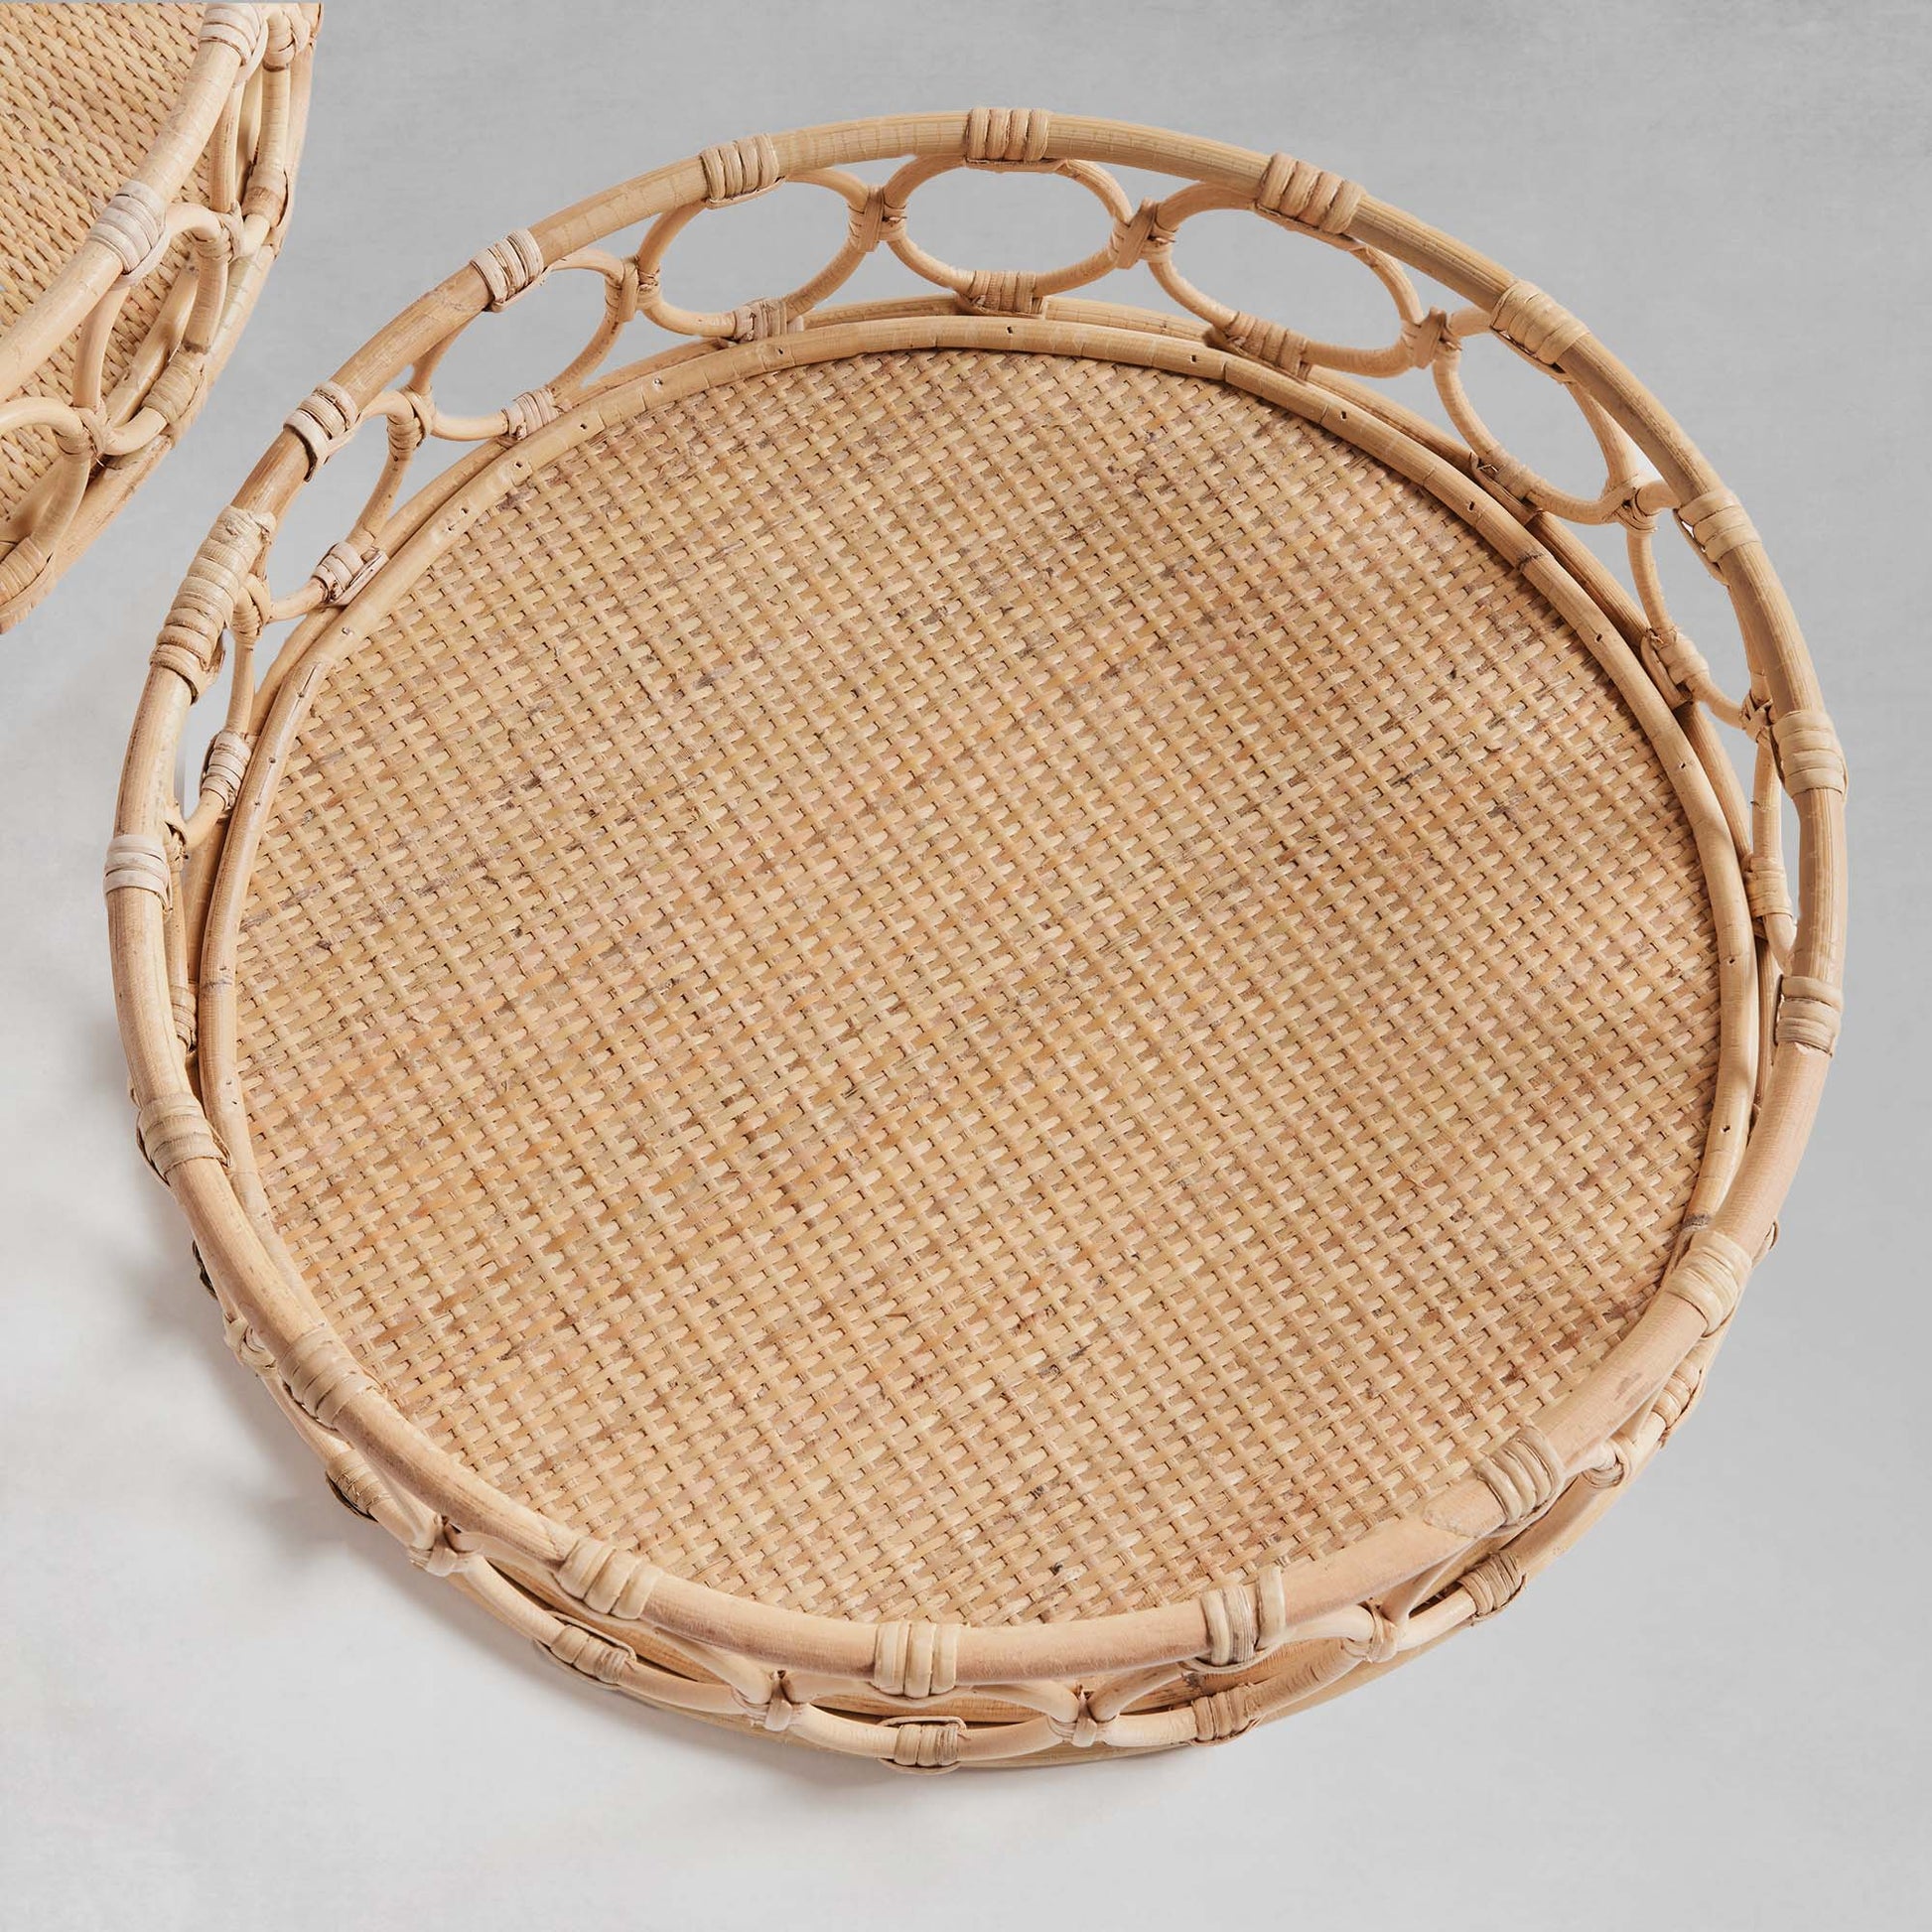 Lattice round rattan serving trays, top view,  with gray background.